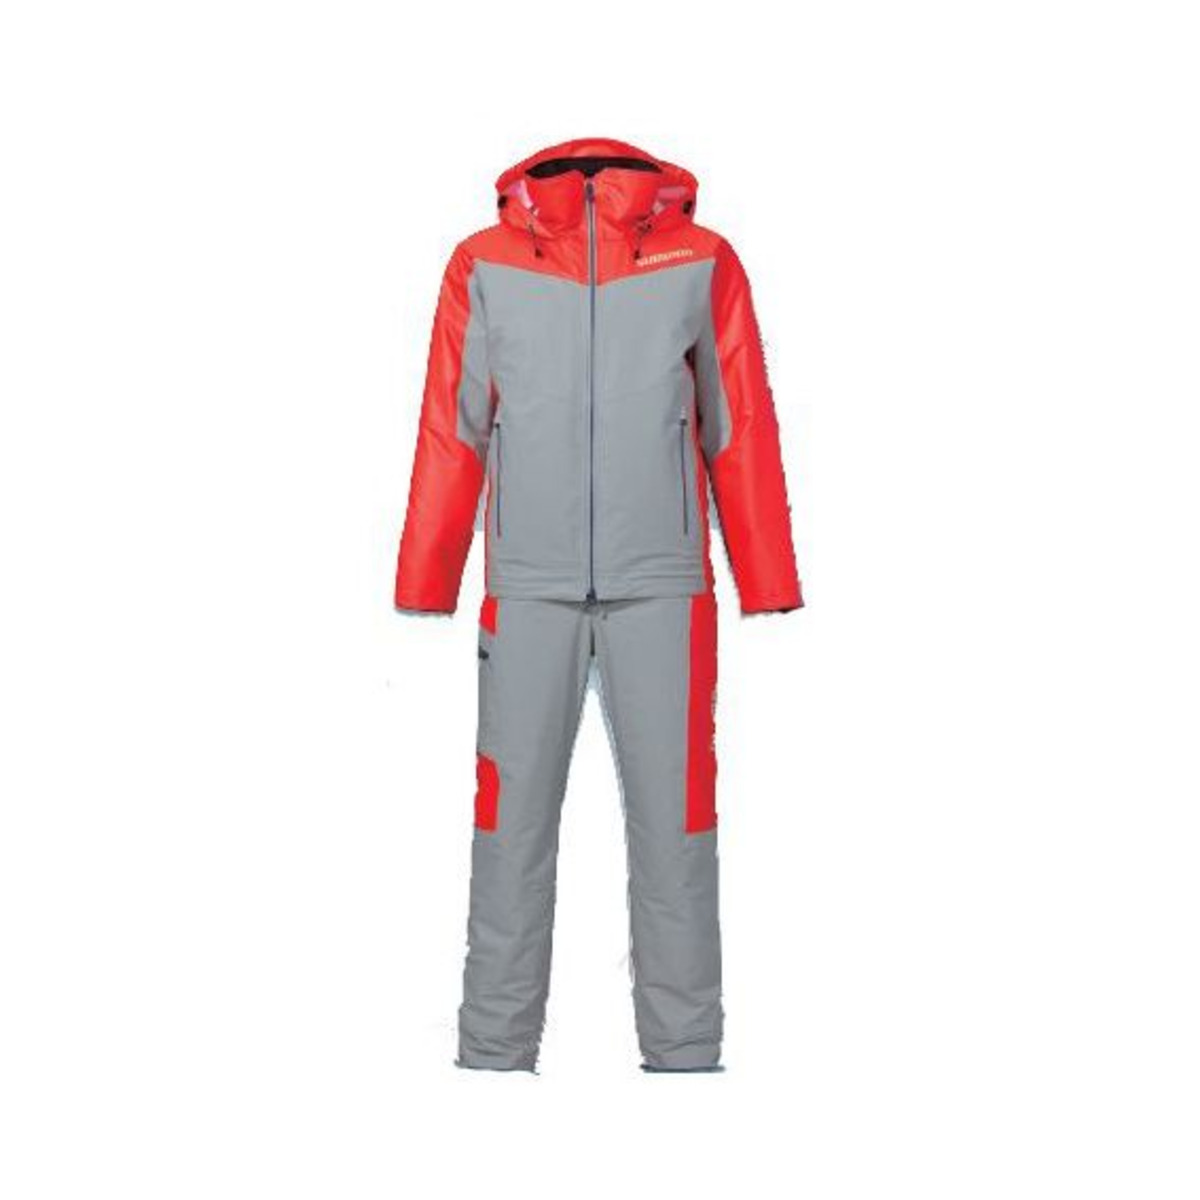 Shimano Thermal Suit - M - Red-Grey